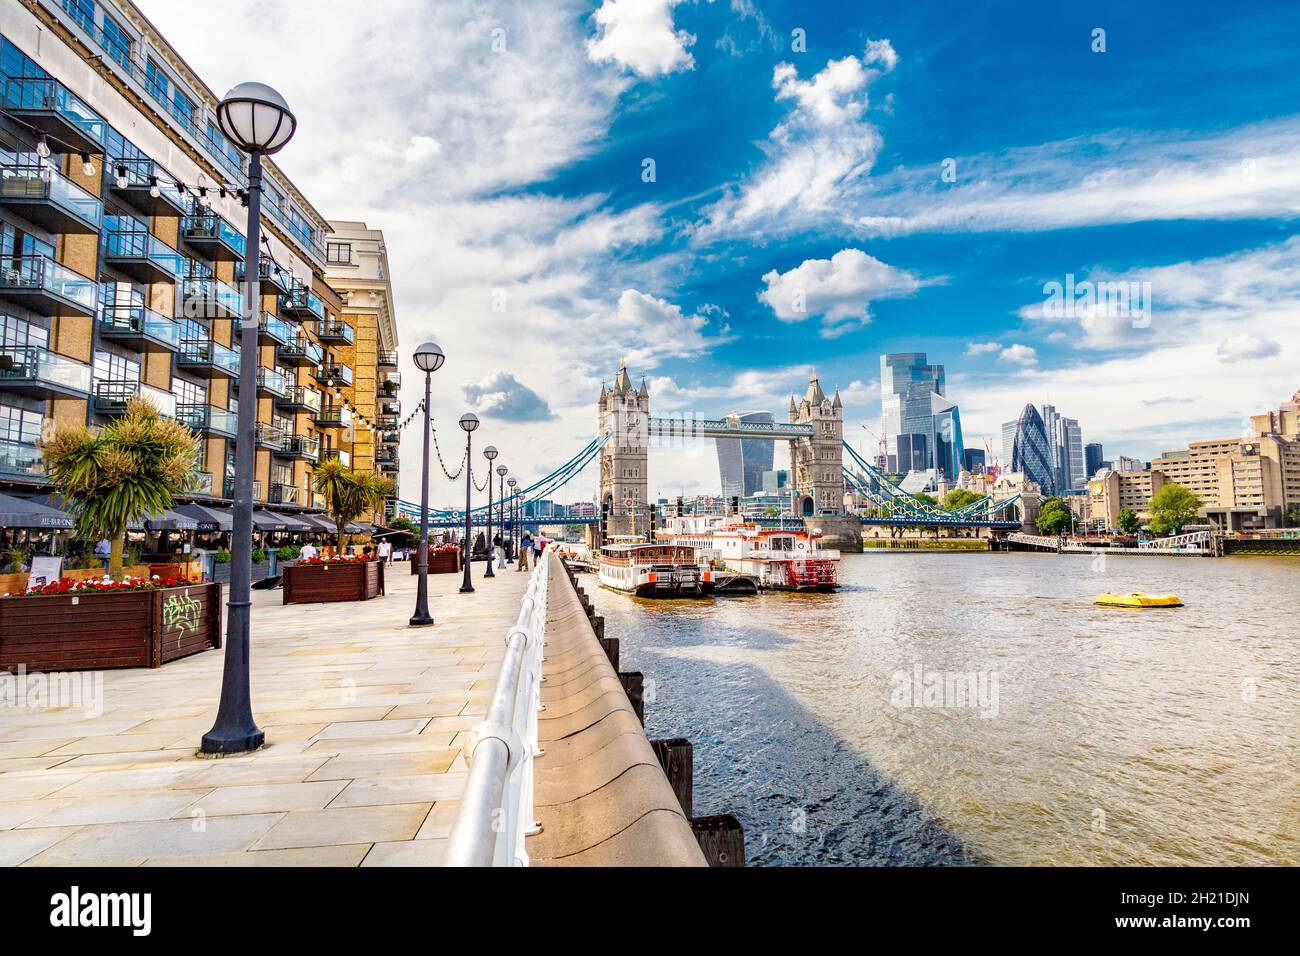 View of Tower Bridge from Butler's Wharf Pier, Shad Thames, London, UK Stock Photo